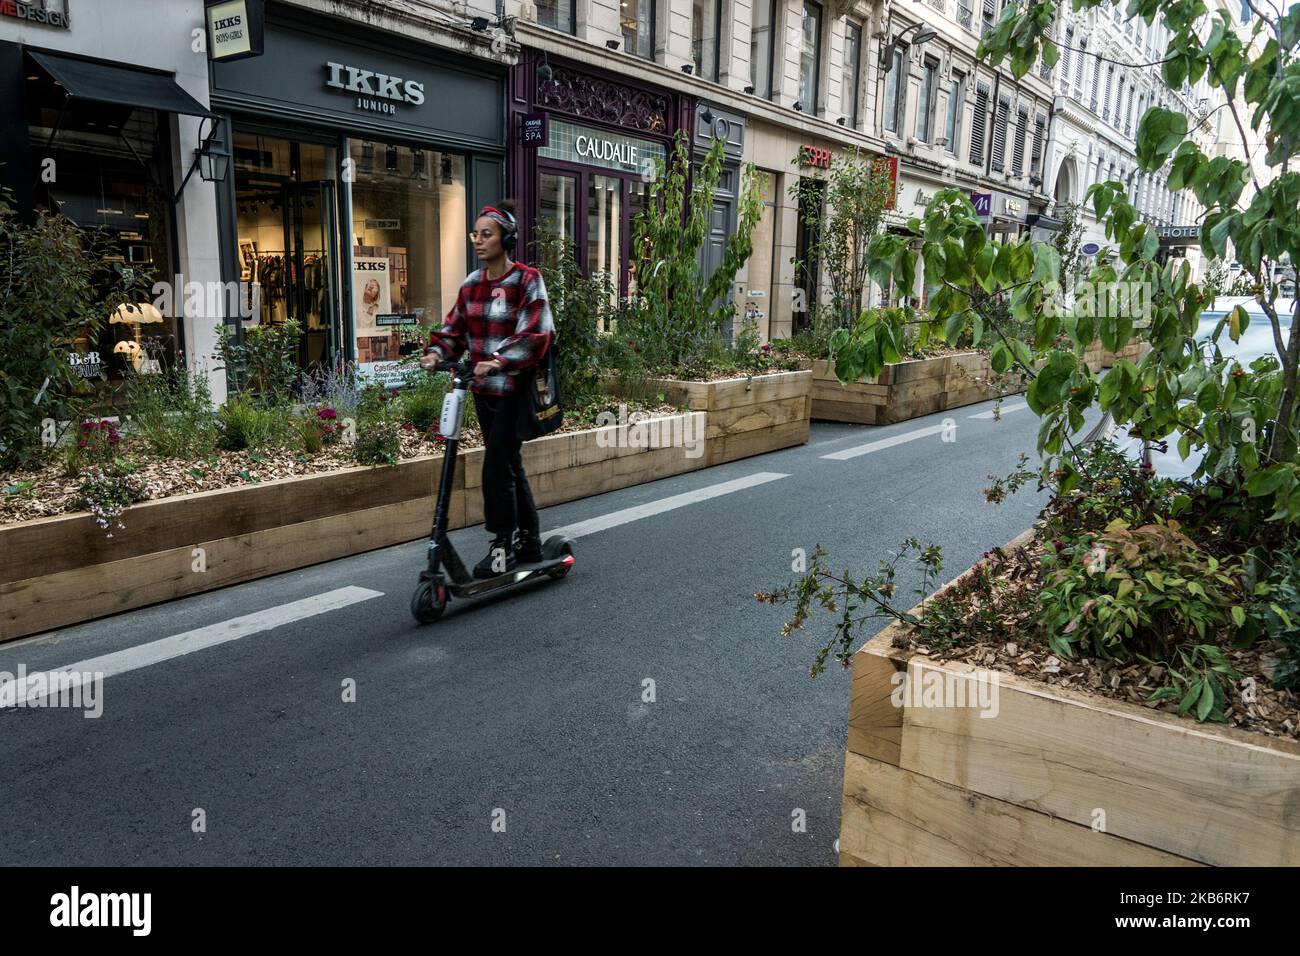 Pedestrianisation of Lyon's city centre as requested by the city hall with the installation of plant containers on the roadway, in Lyon, France on 23 September 2019. The installation on the bus and bicycle lane has sparked the anger of ecologists and cyclists who accuse Mayor Gérard Collomb of making decisions that accommodate car owners, and make travel in the city centre more dangerous for two-wheelers. (Photo by Nicolas Liponne/NurPhoto) Stock Photo